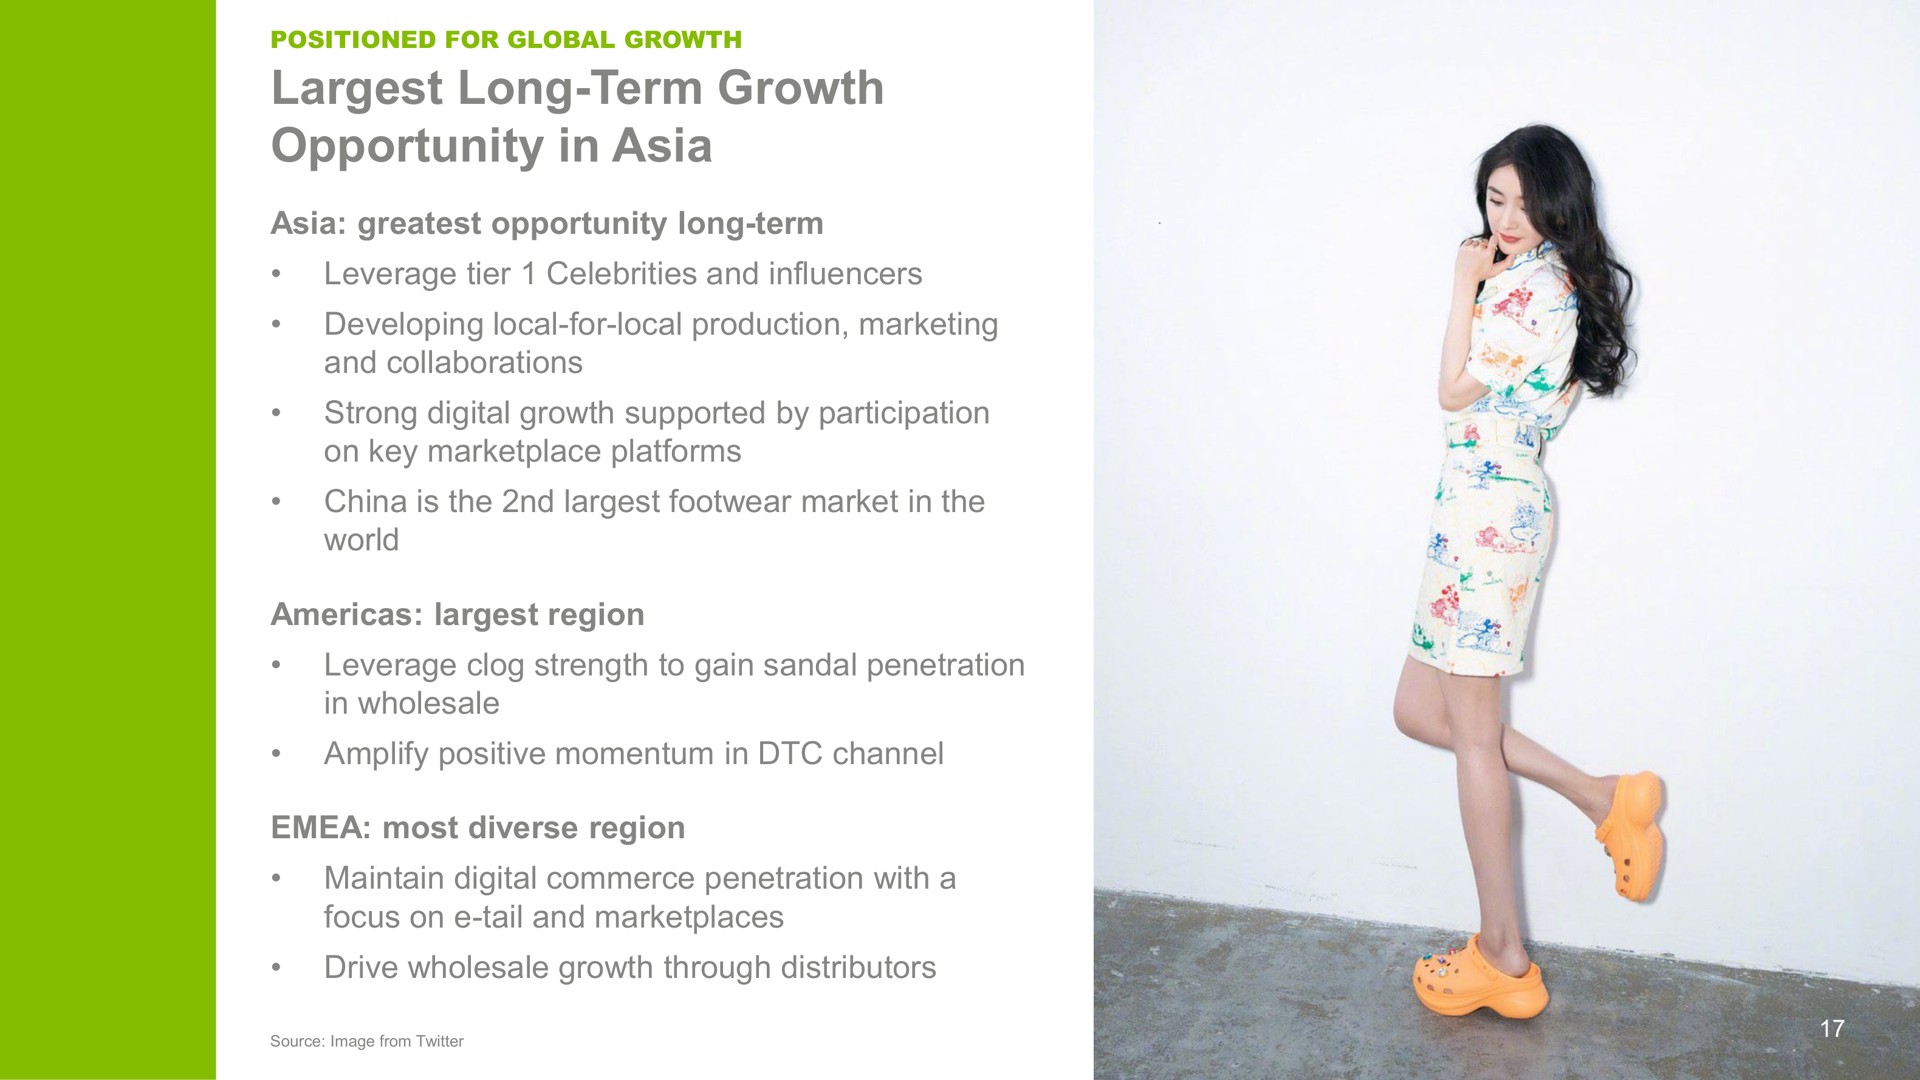 long term growth opportunity in | Crocs